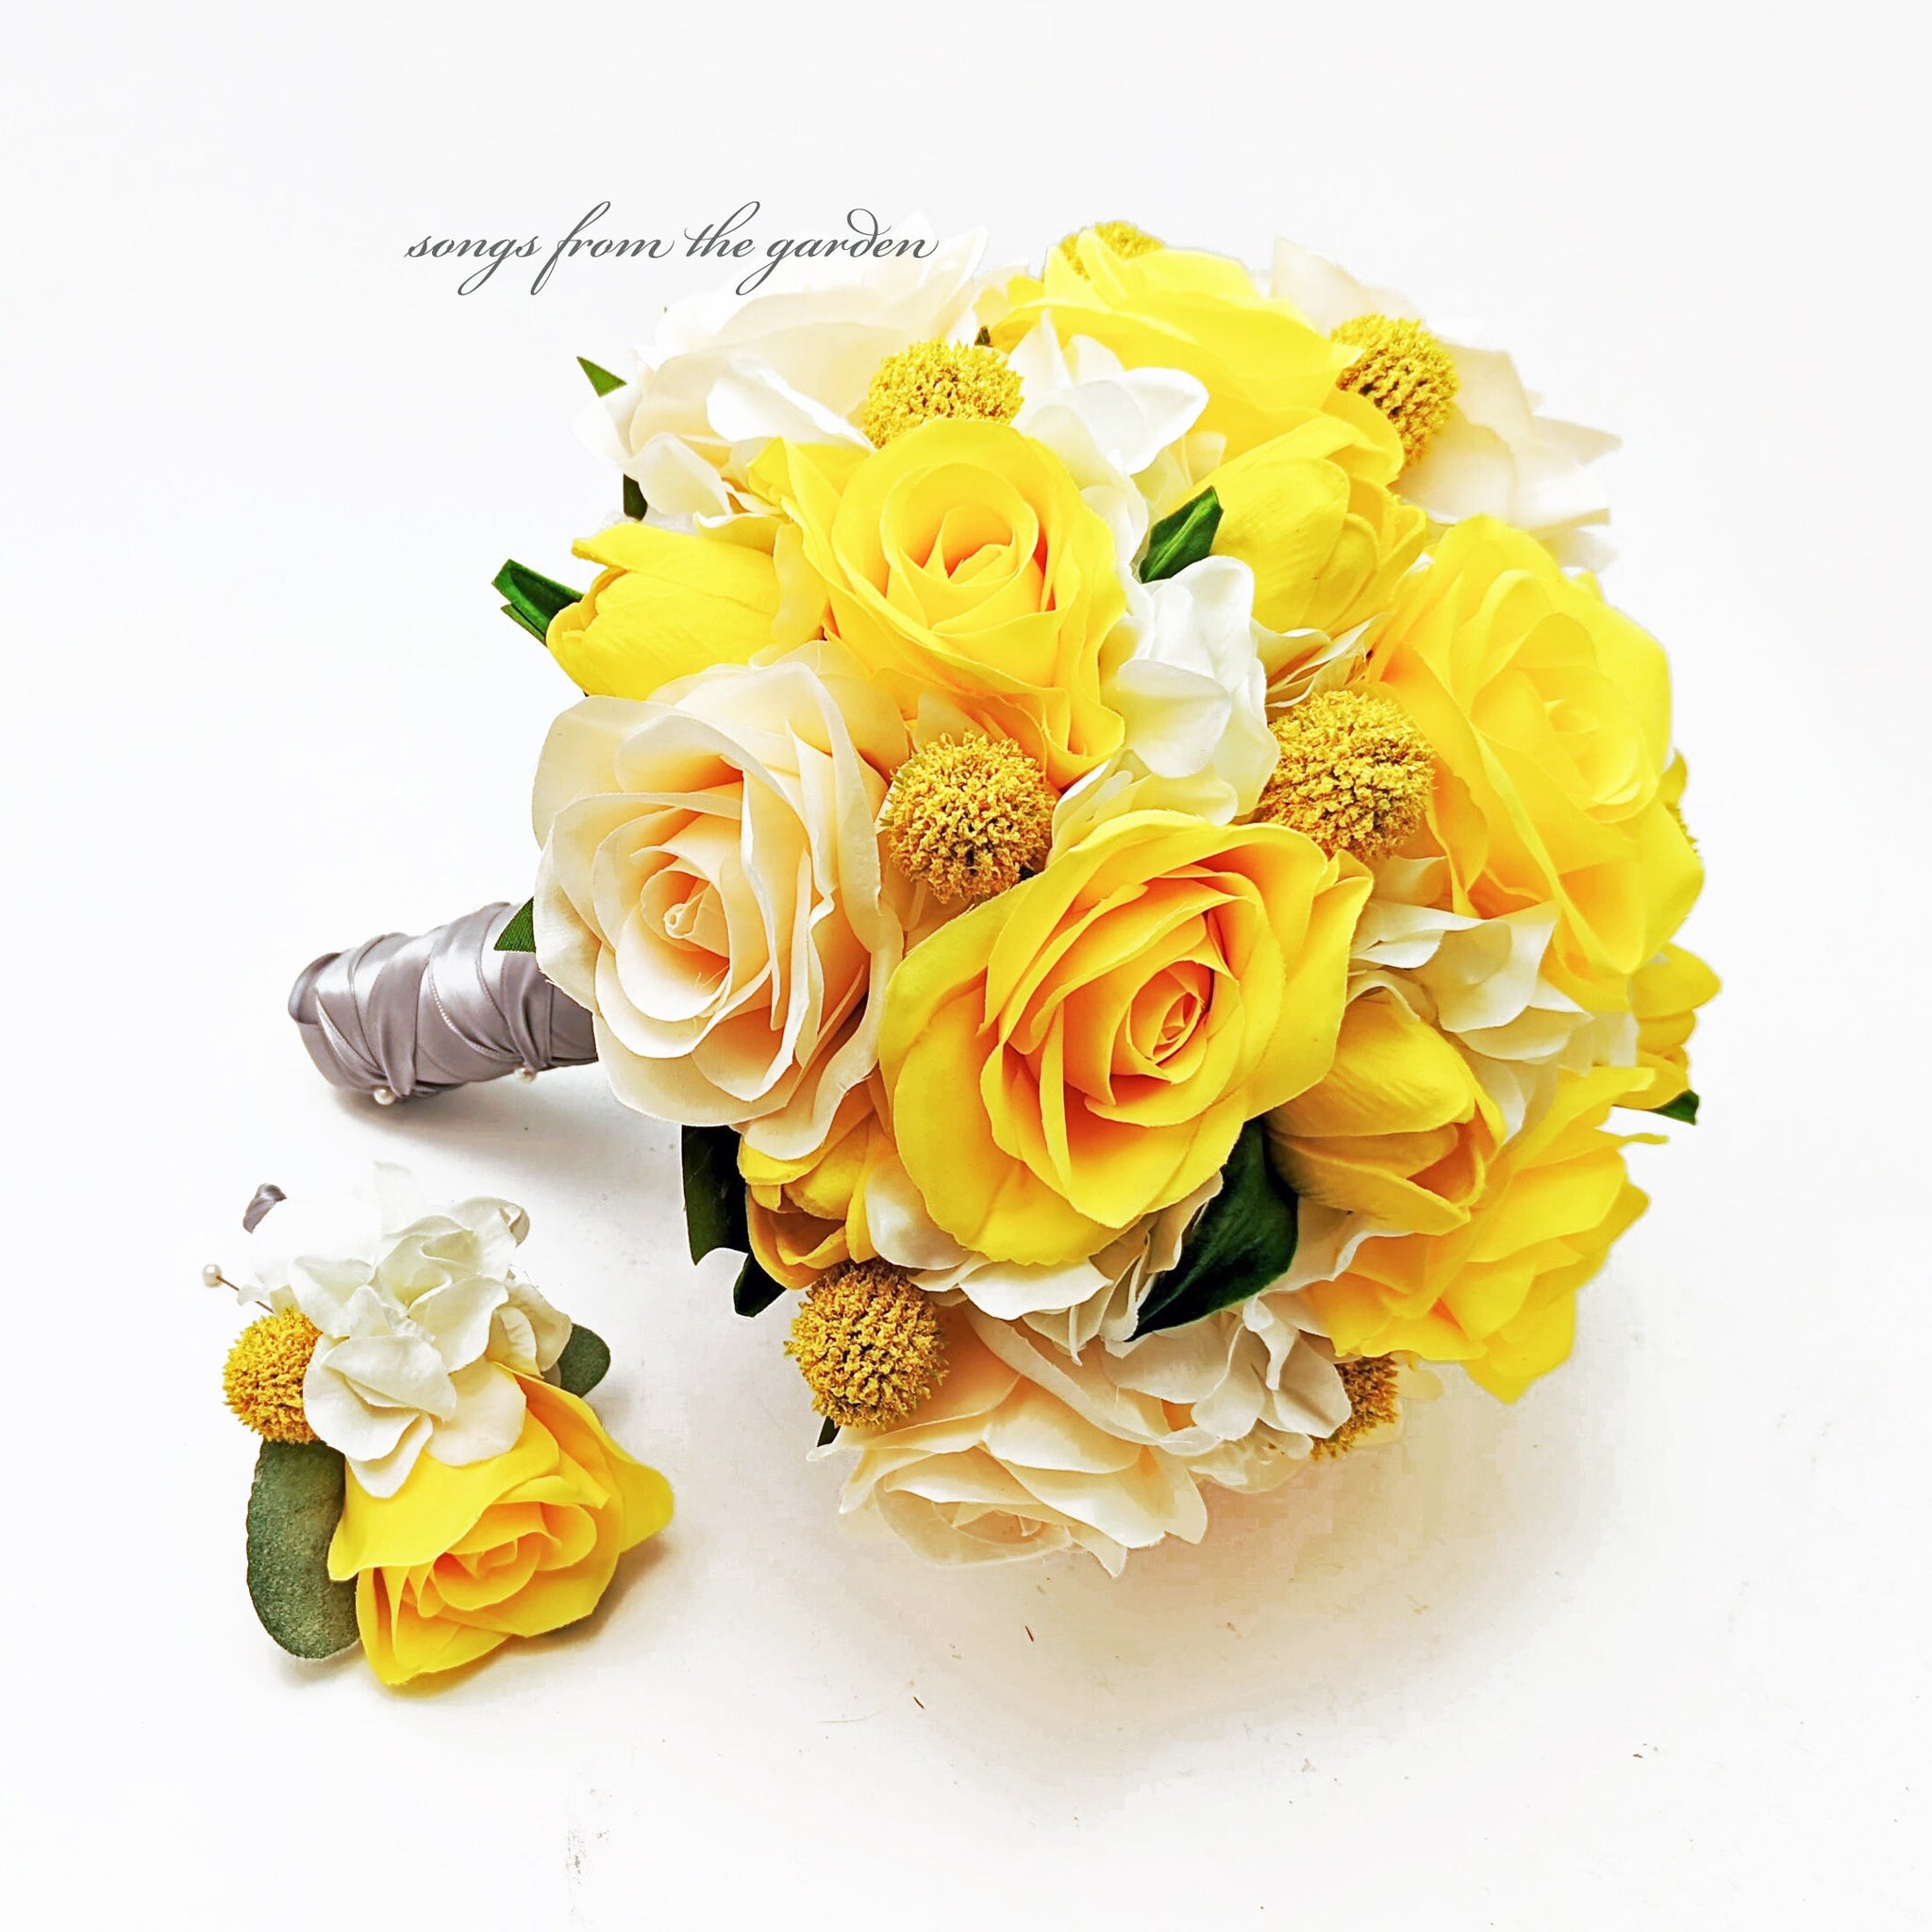 Yellow Ivory Bridal Bouquet Roses Craspedia Tulips - Add Bridesmaid Bouquets Wedding Corsages Boutonnieres Flower Crown Arch Flowers & More!